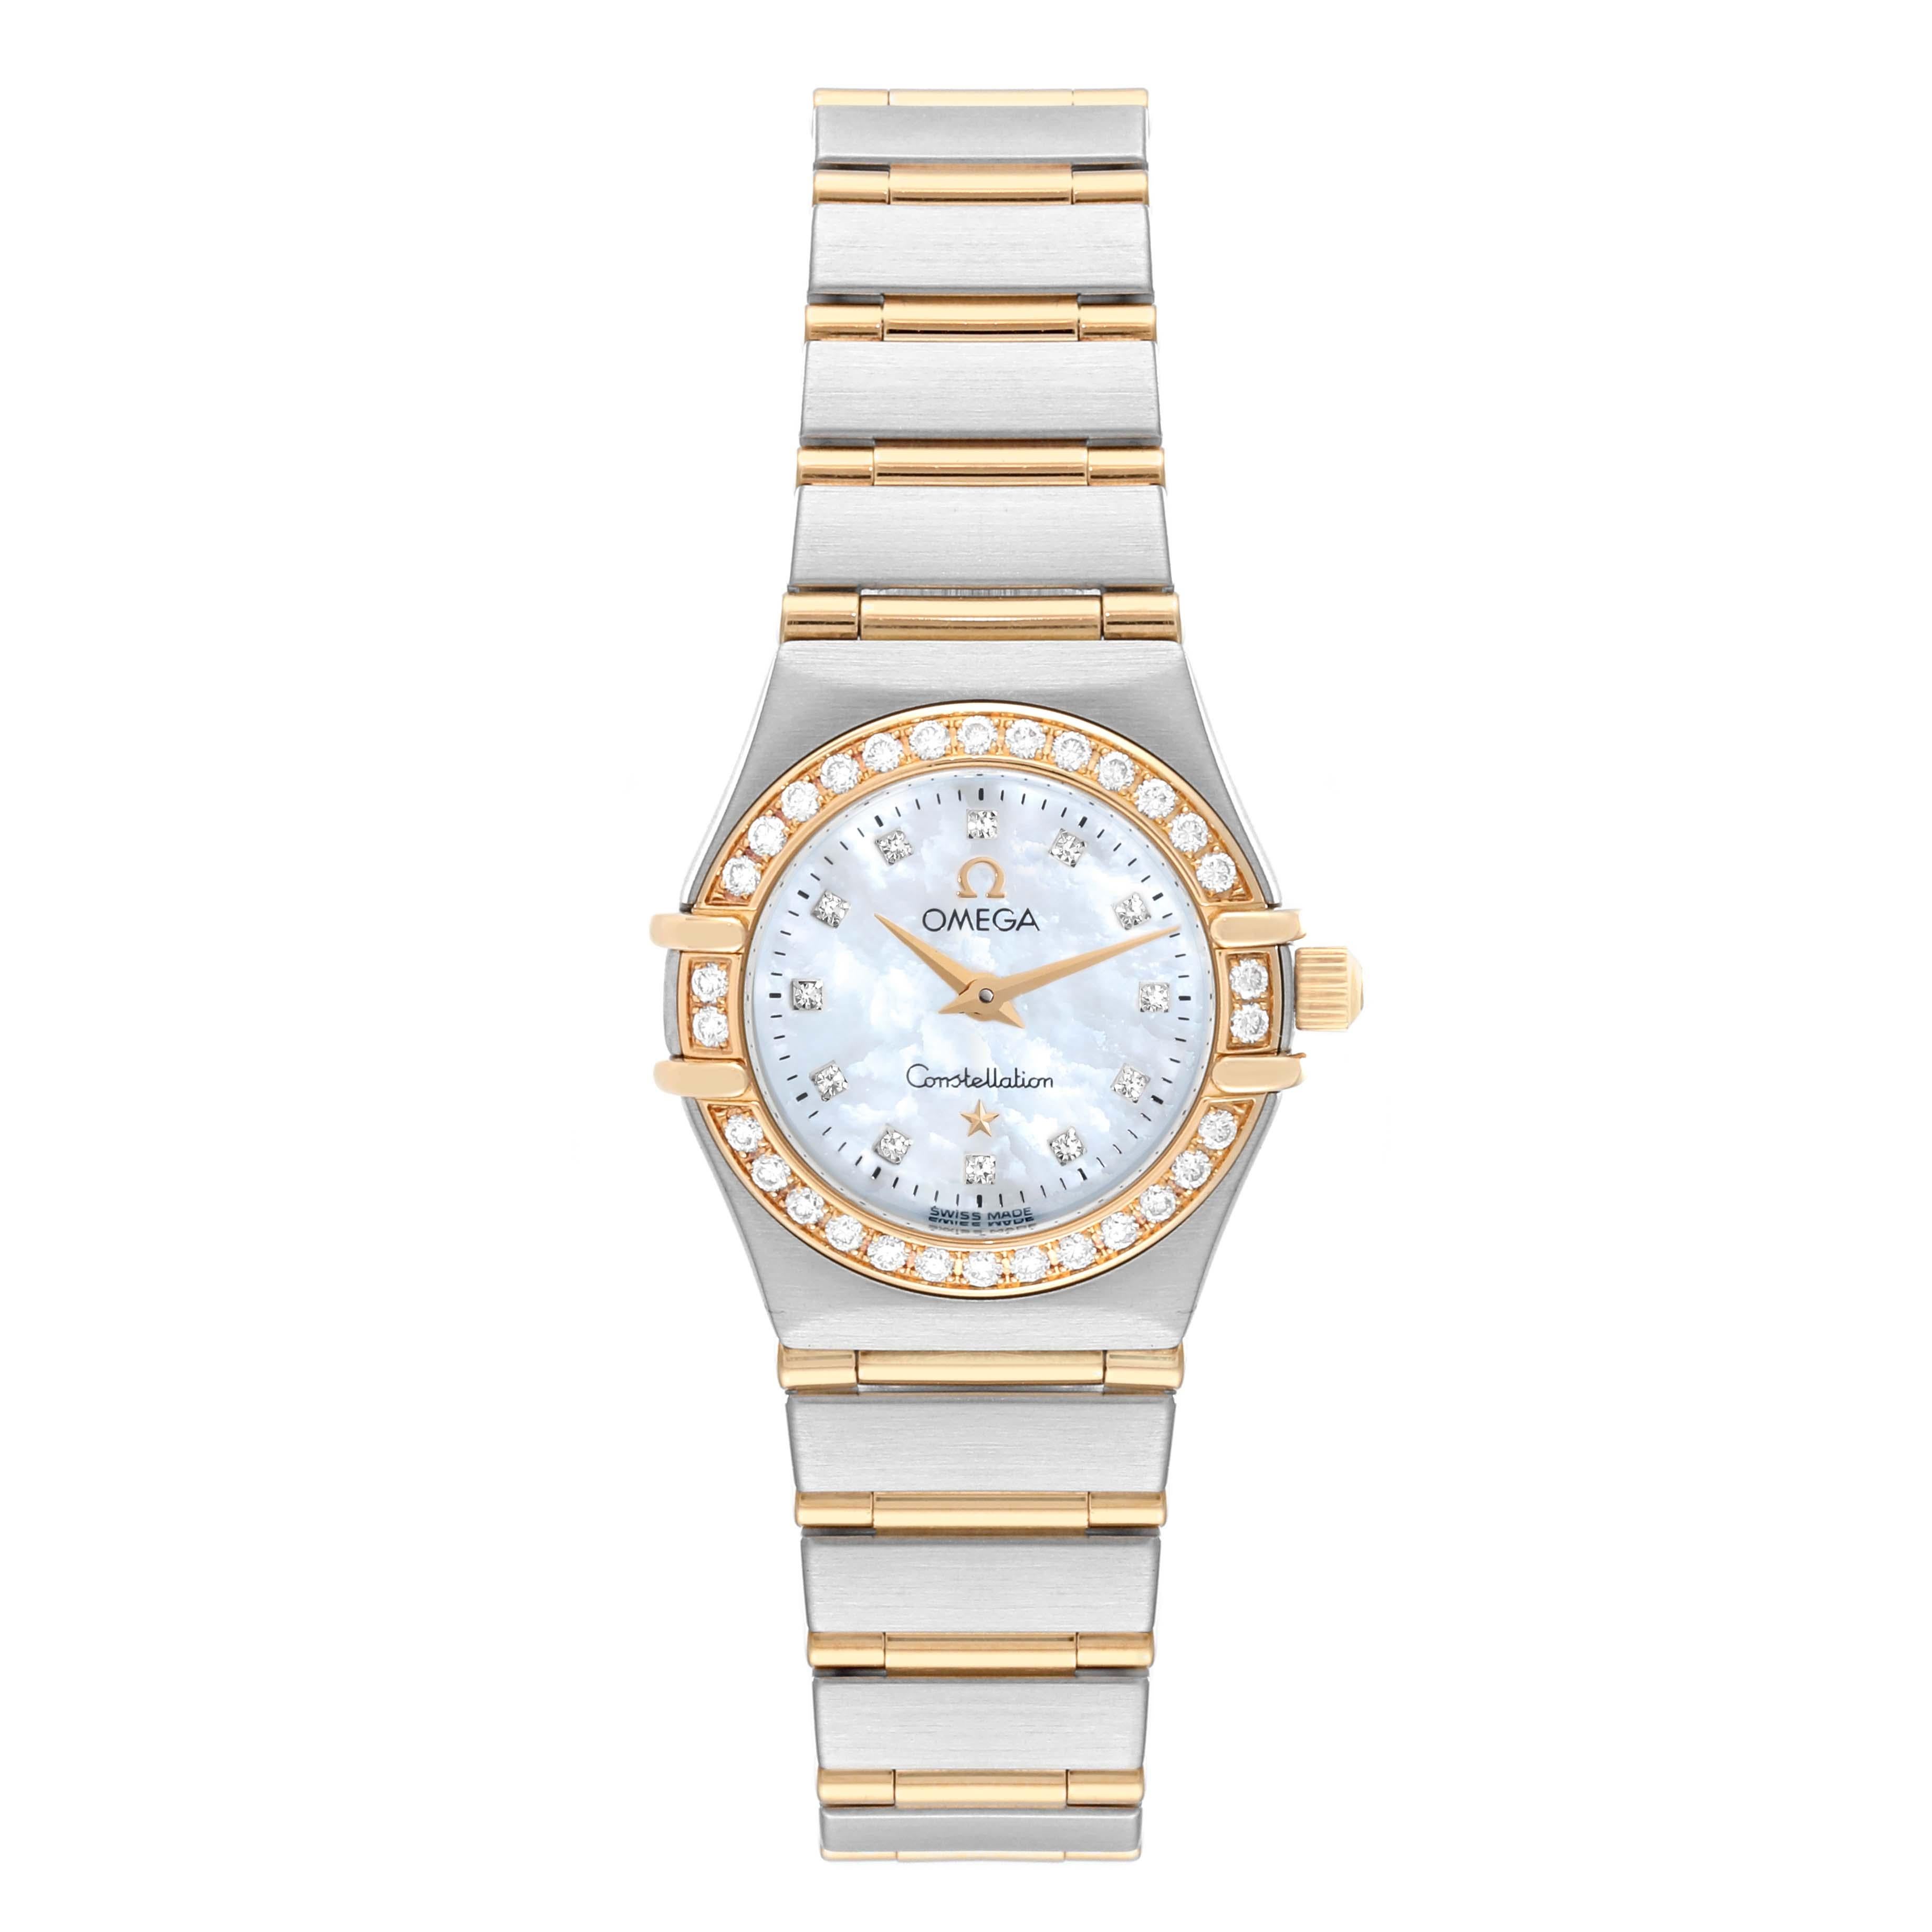 Omega Constellation 95 MOP Diamond Yellow Gold Steel Ladies Watch 1267.75.00. Quartz movement. Stainless steel and 18k yellow gold round case 22.5 mm in diameter. 18k yellow gold original Omega factory diamond bezel. Scratch resistant sapphire